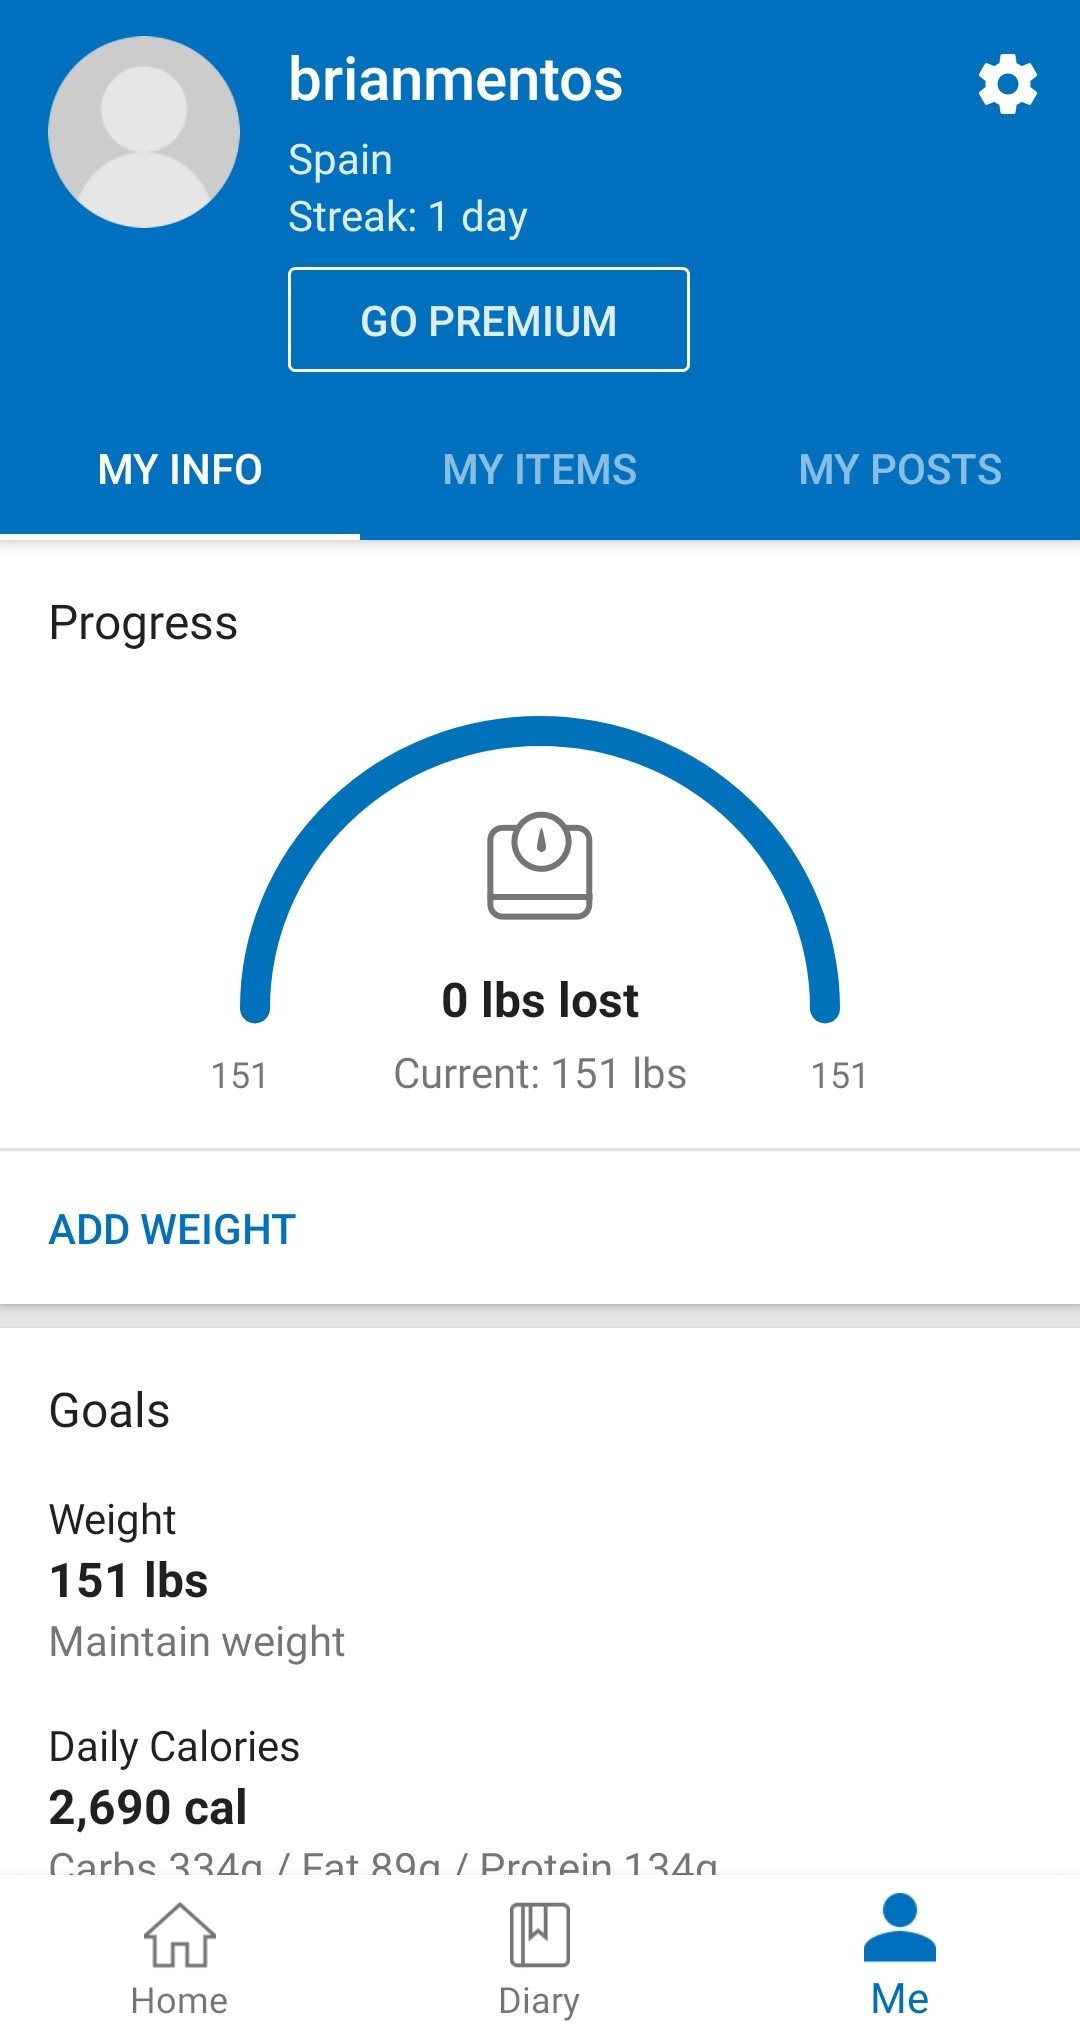 myfitnesspal android app free download